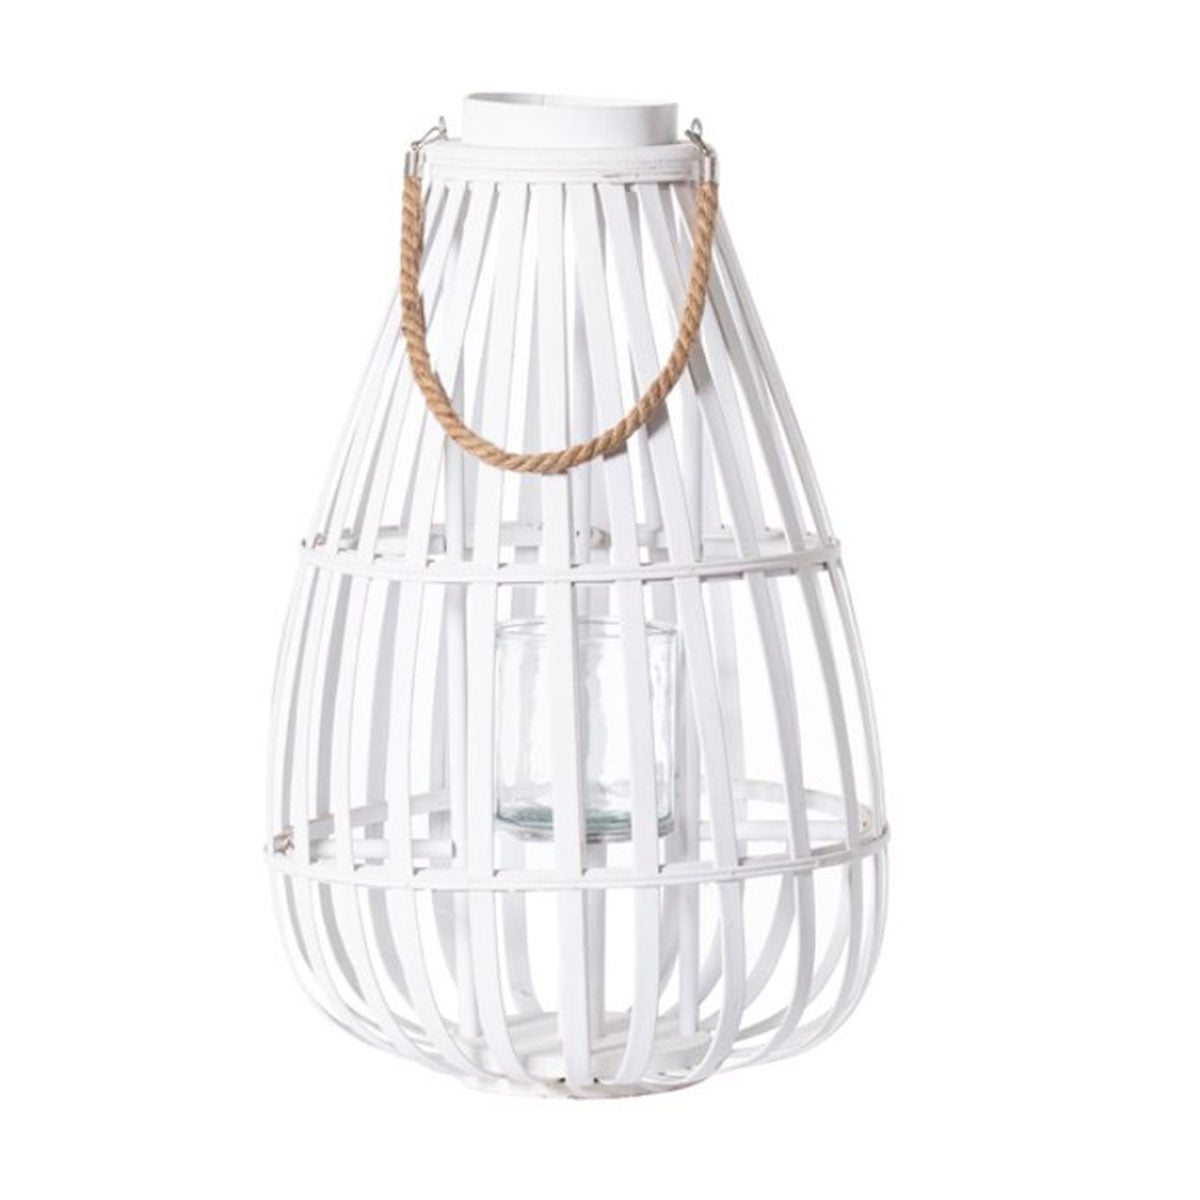 Domed White Lantern With Rope Detail